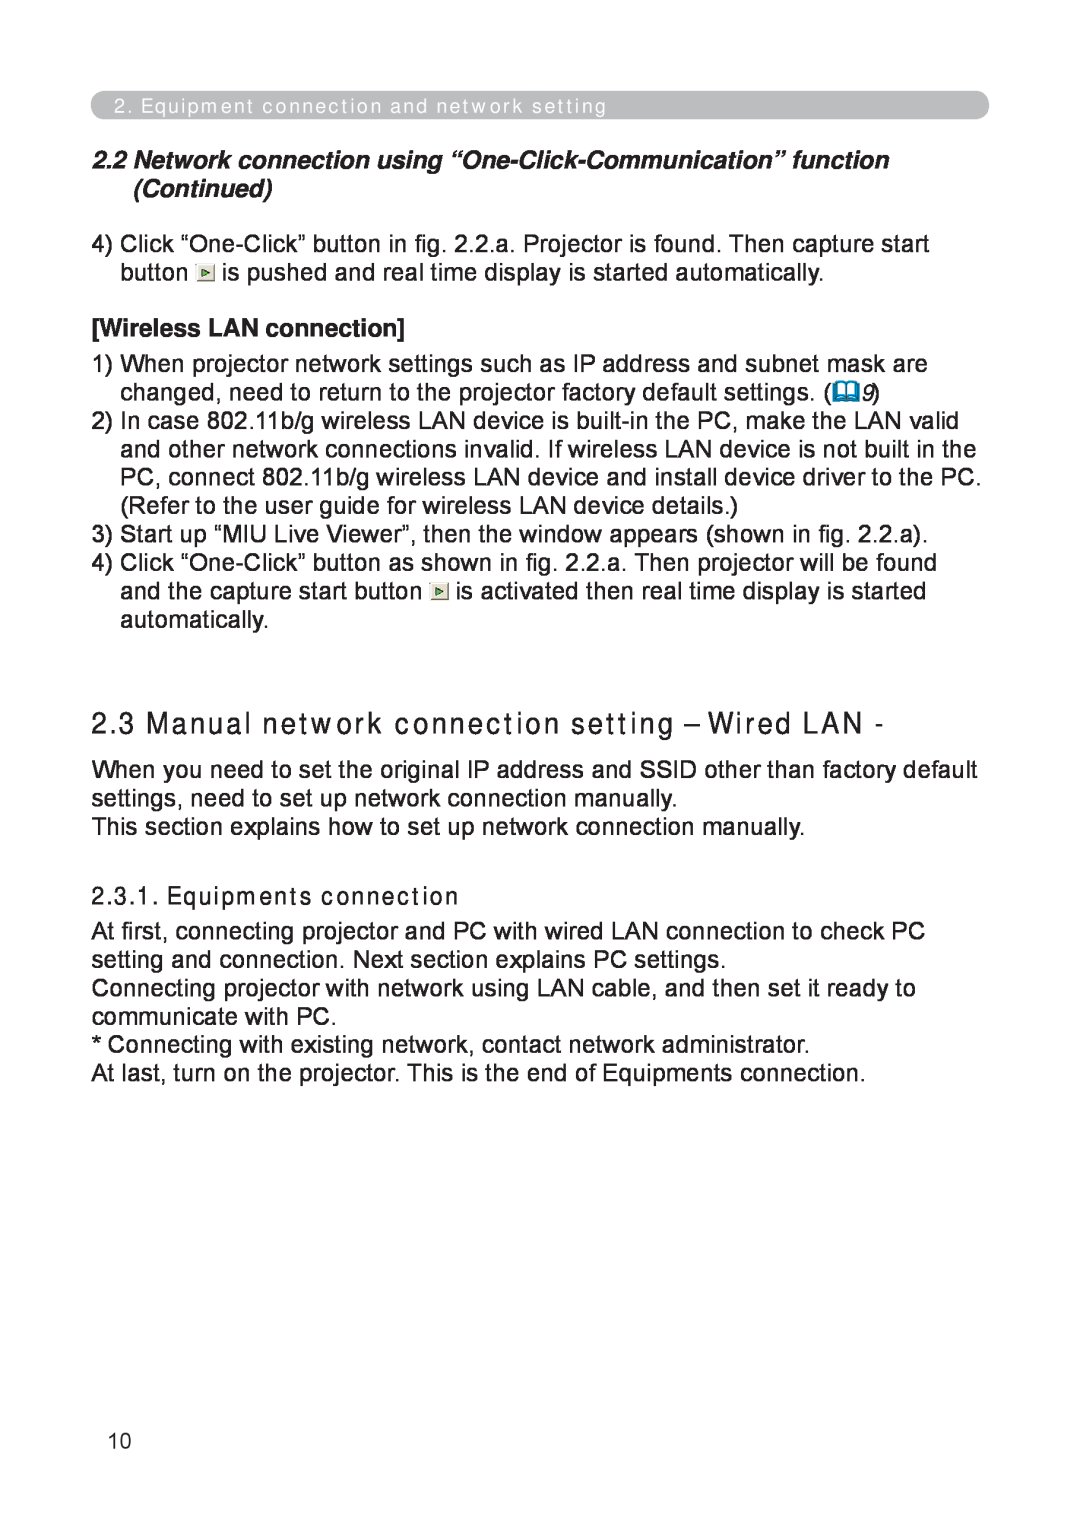 3M X62w manual Manual network connection setting – Wired LAN, Wireless LAN connection, Equipments connection 